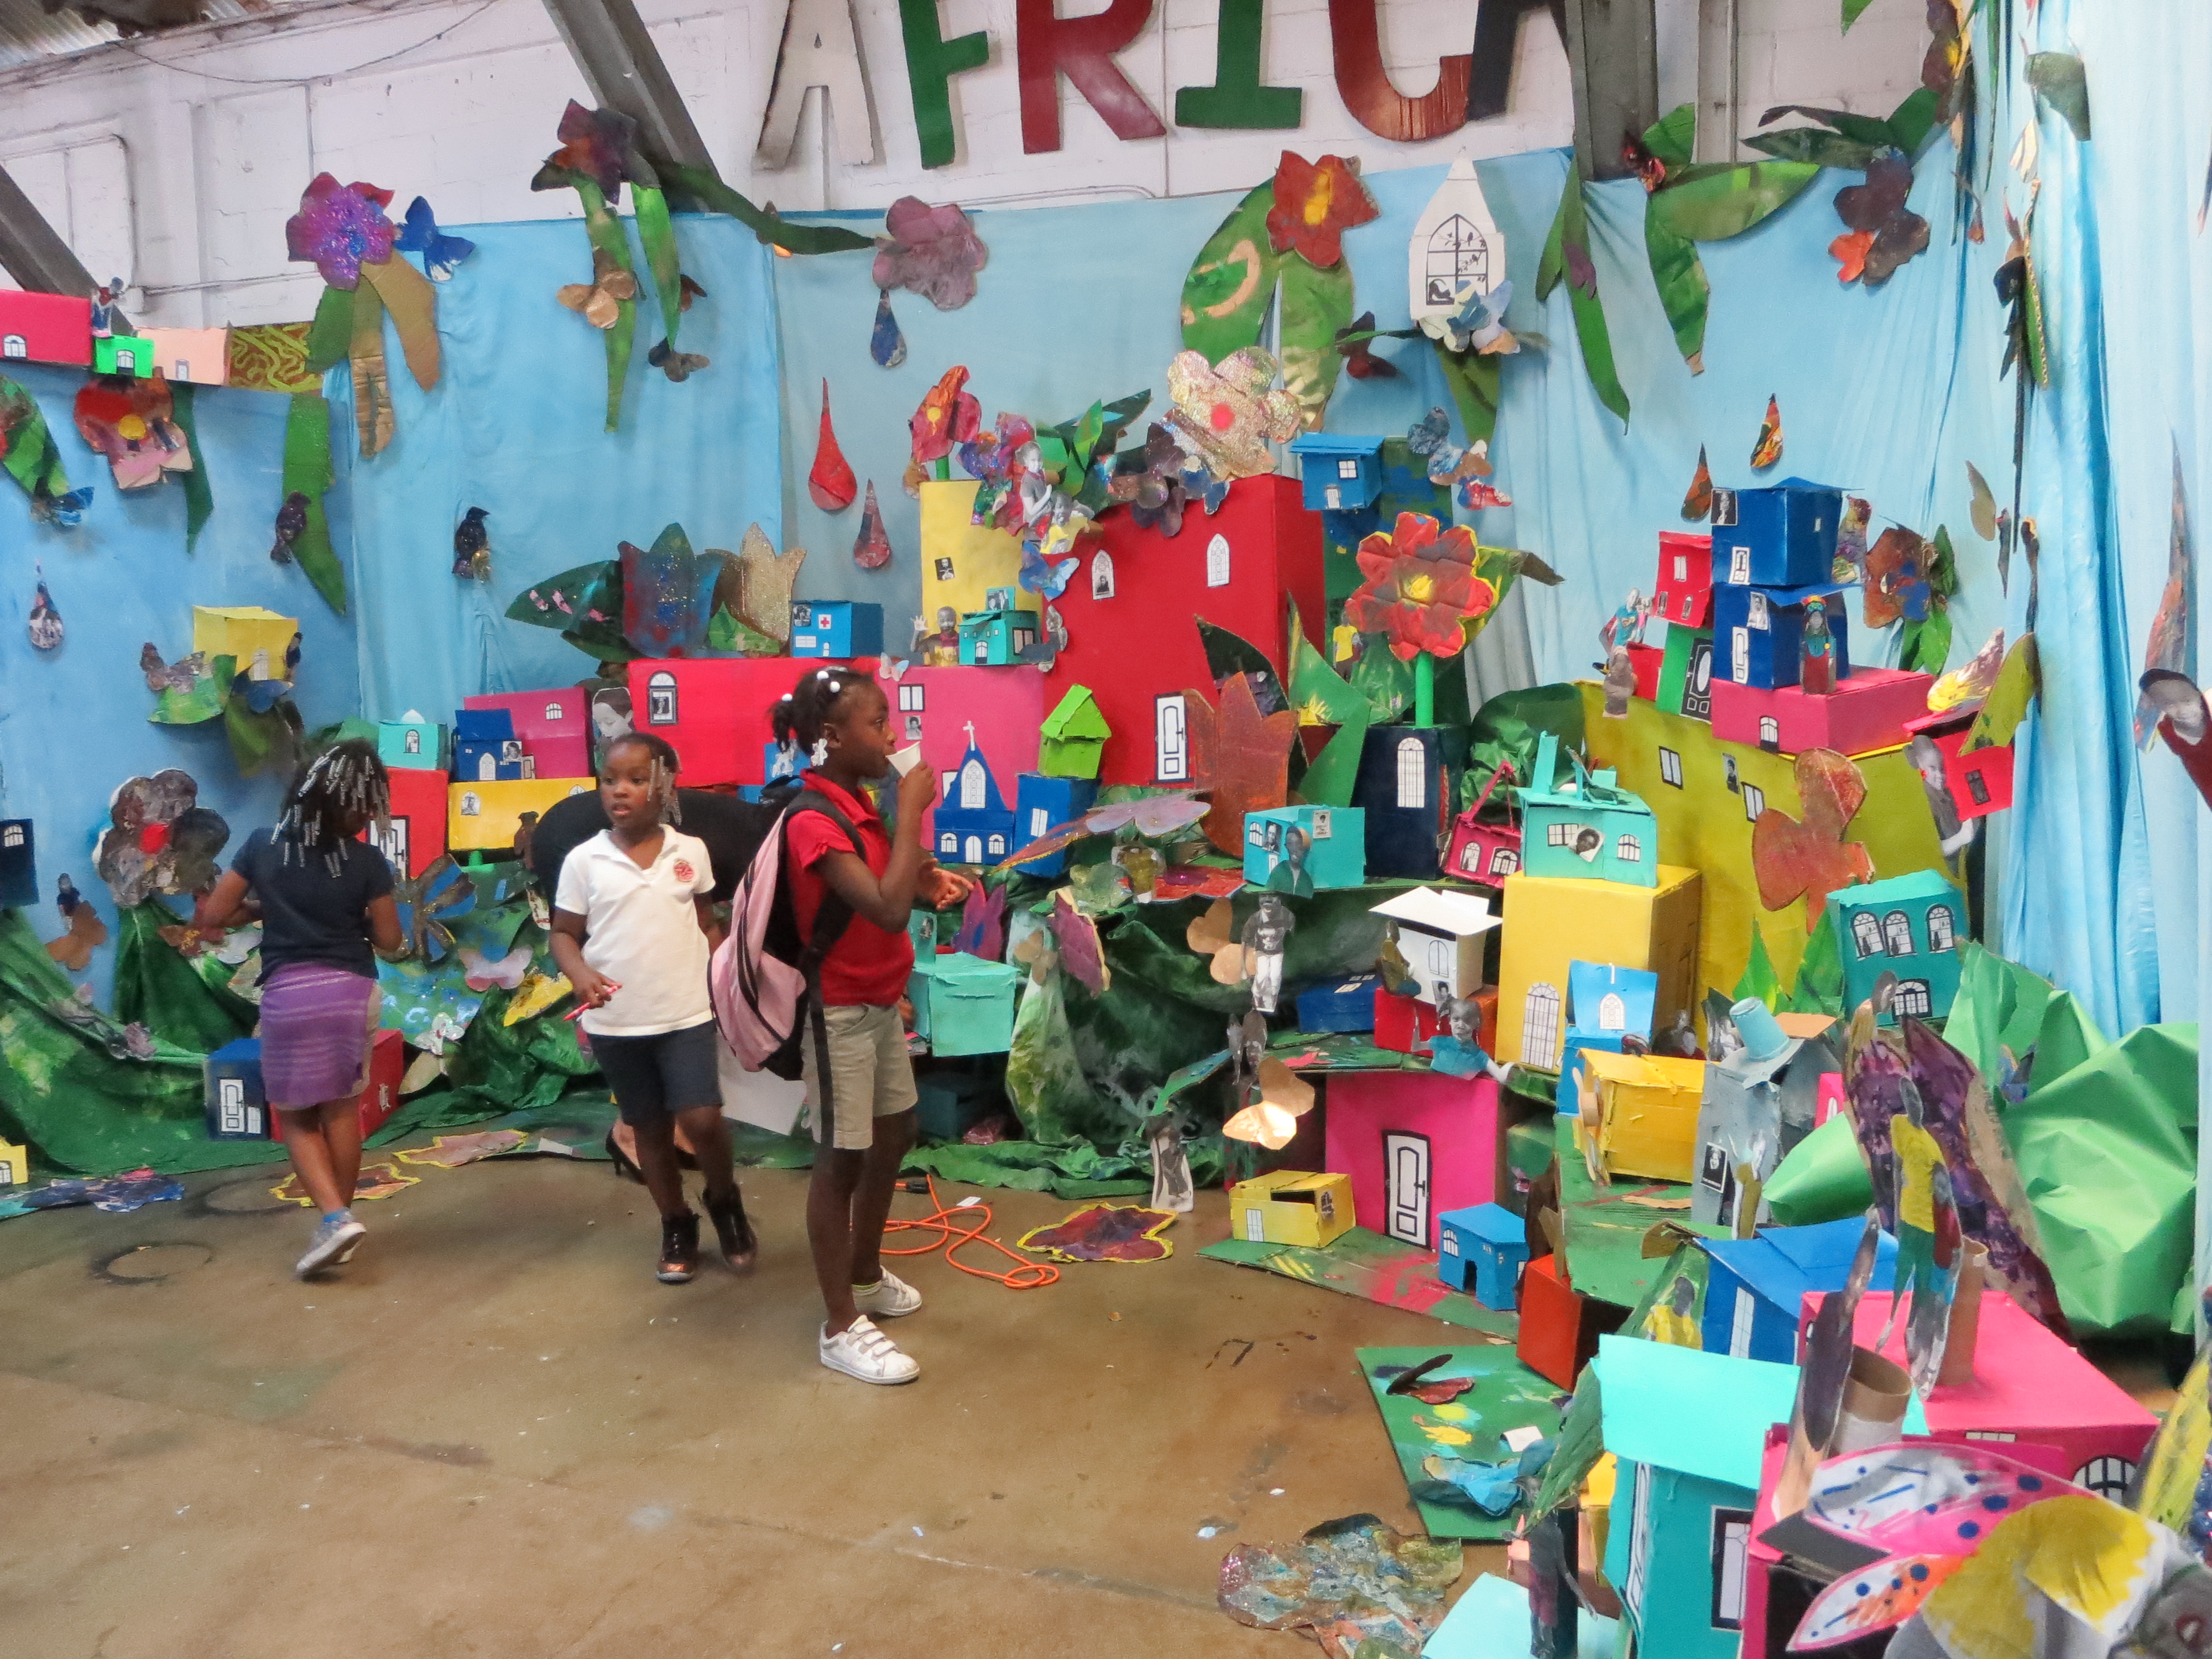 Artwork by students of Arts for Learning's Afterschool program at the Barnyard Coconut Grove Cares, with Teaching Artists Yanira Collado and Carolina Cueva.